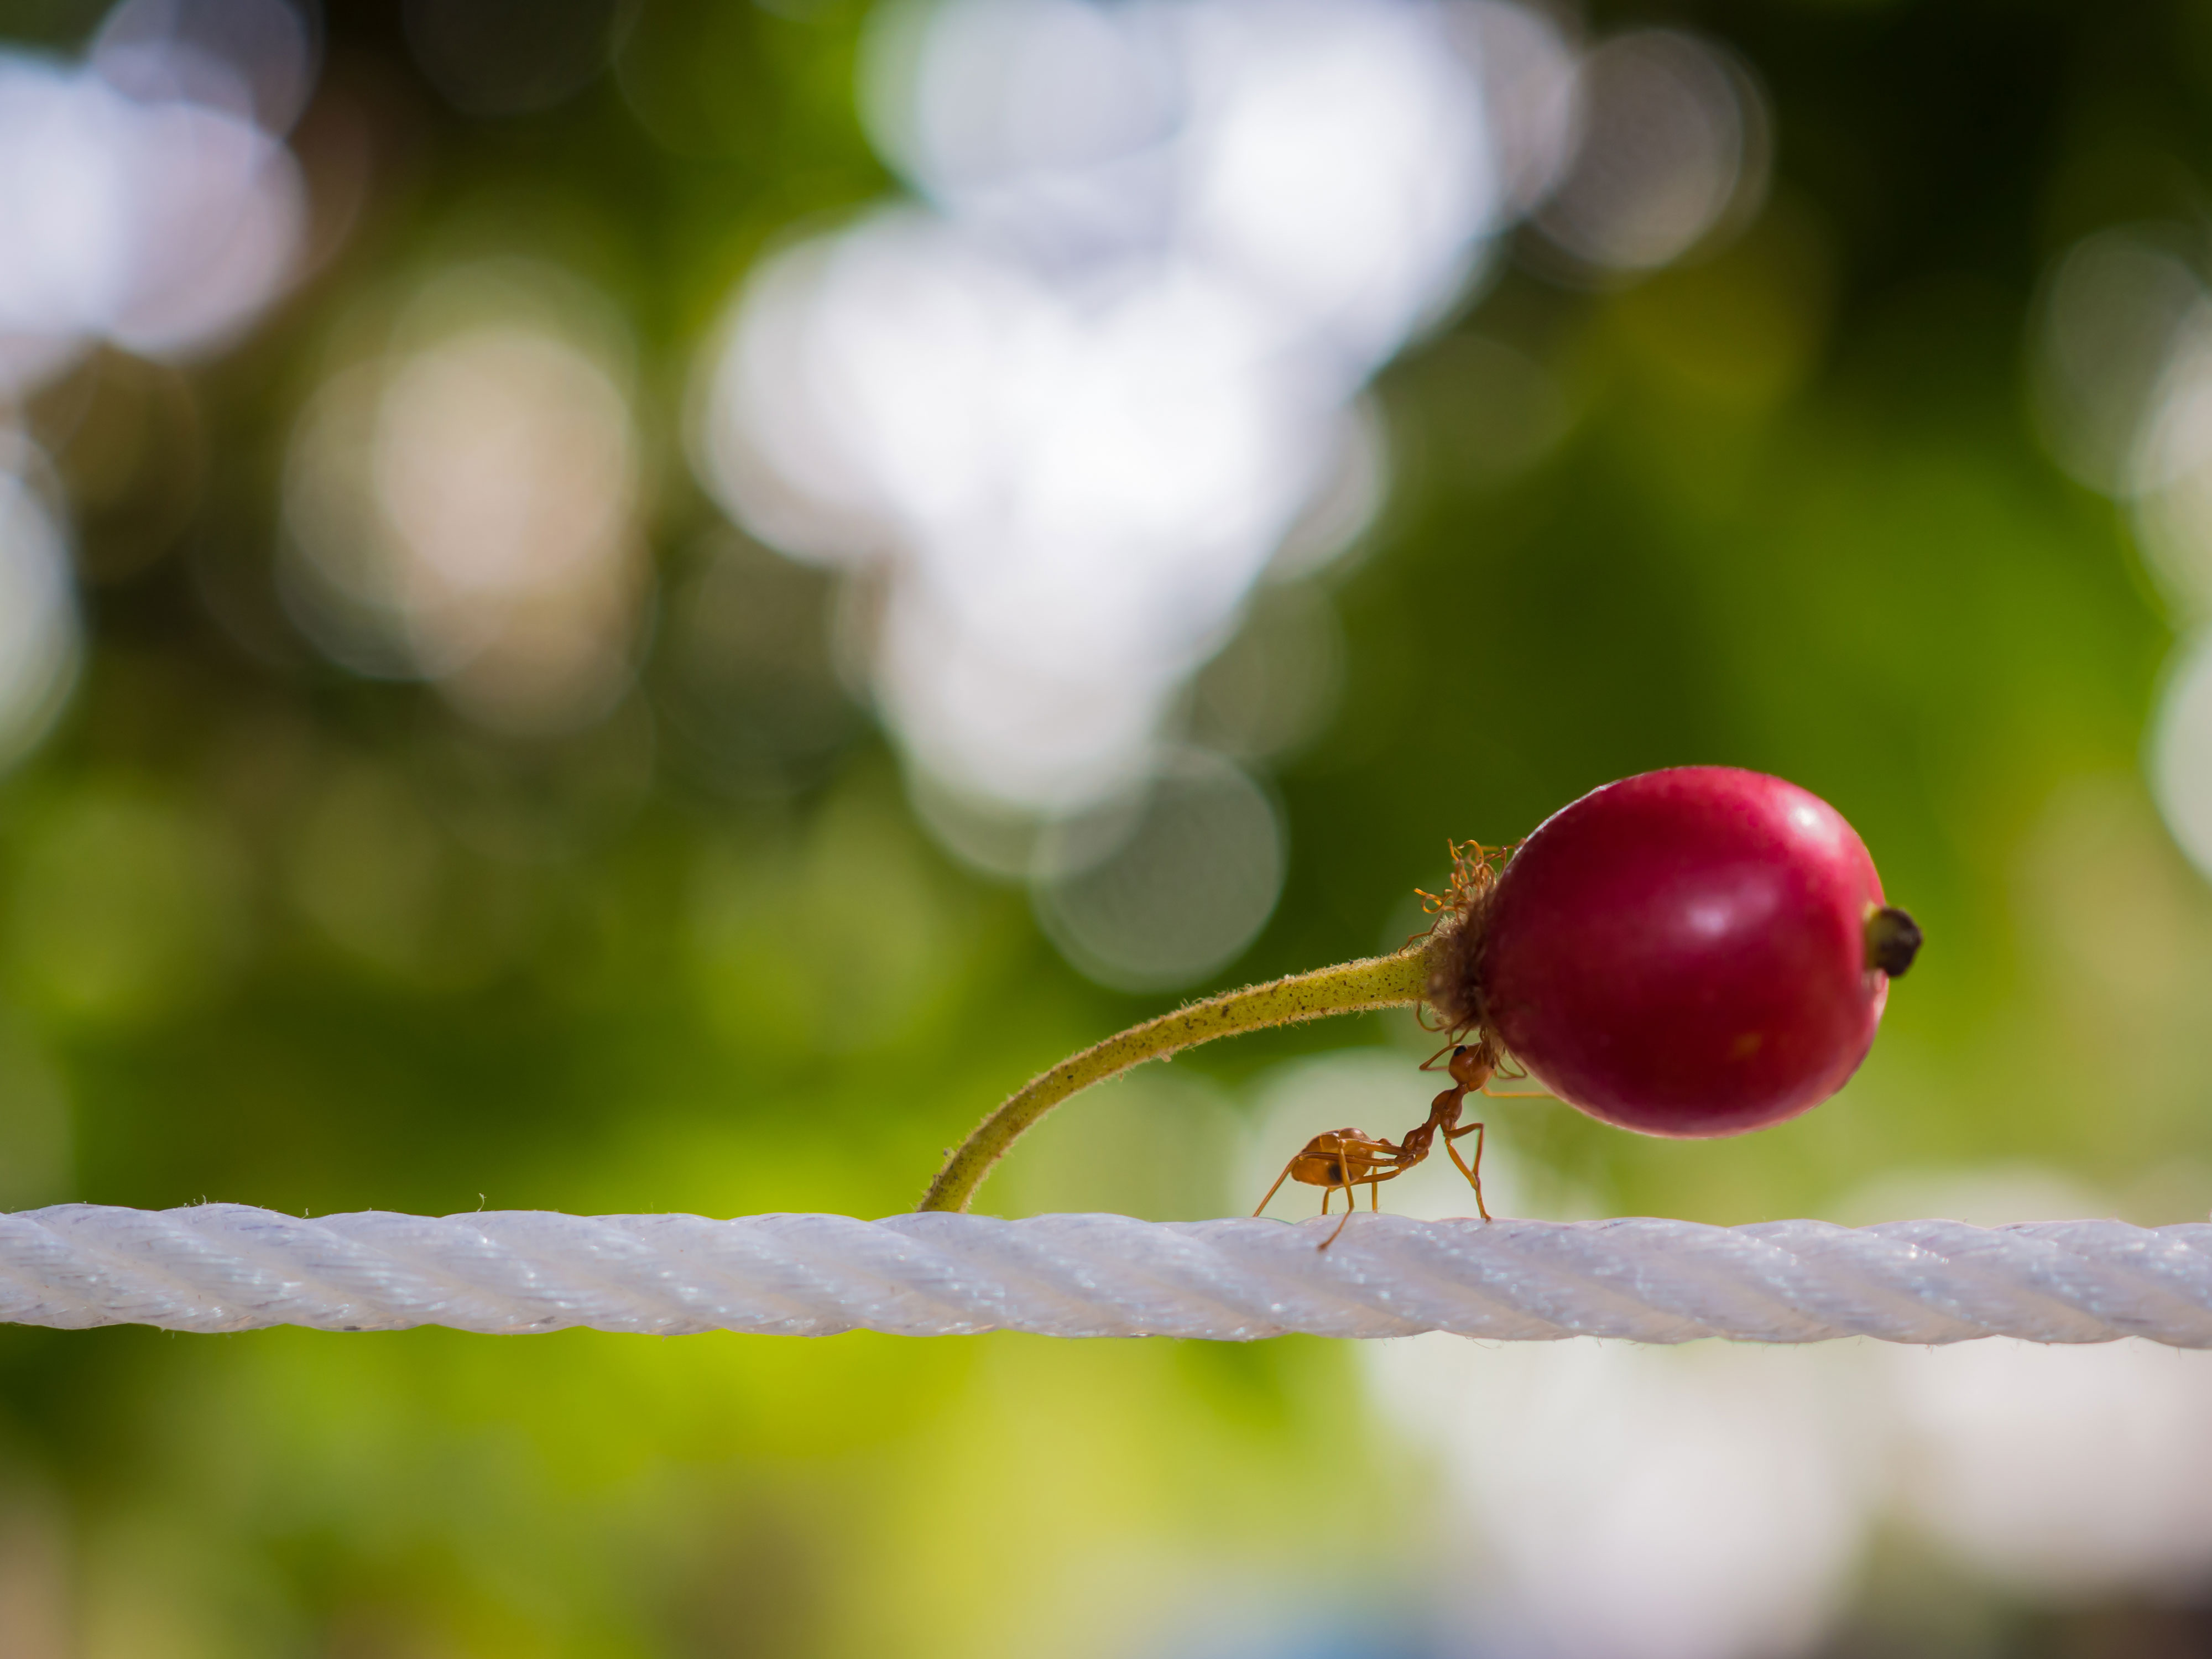 An ant carrying its food.